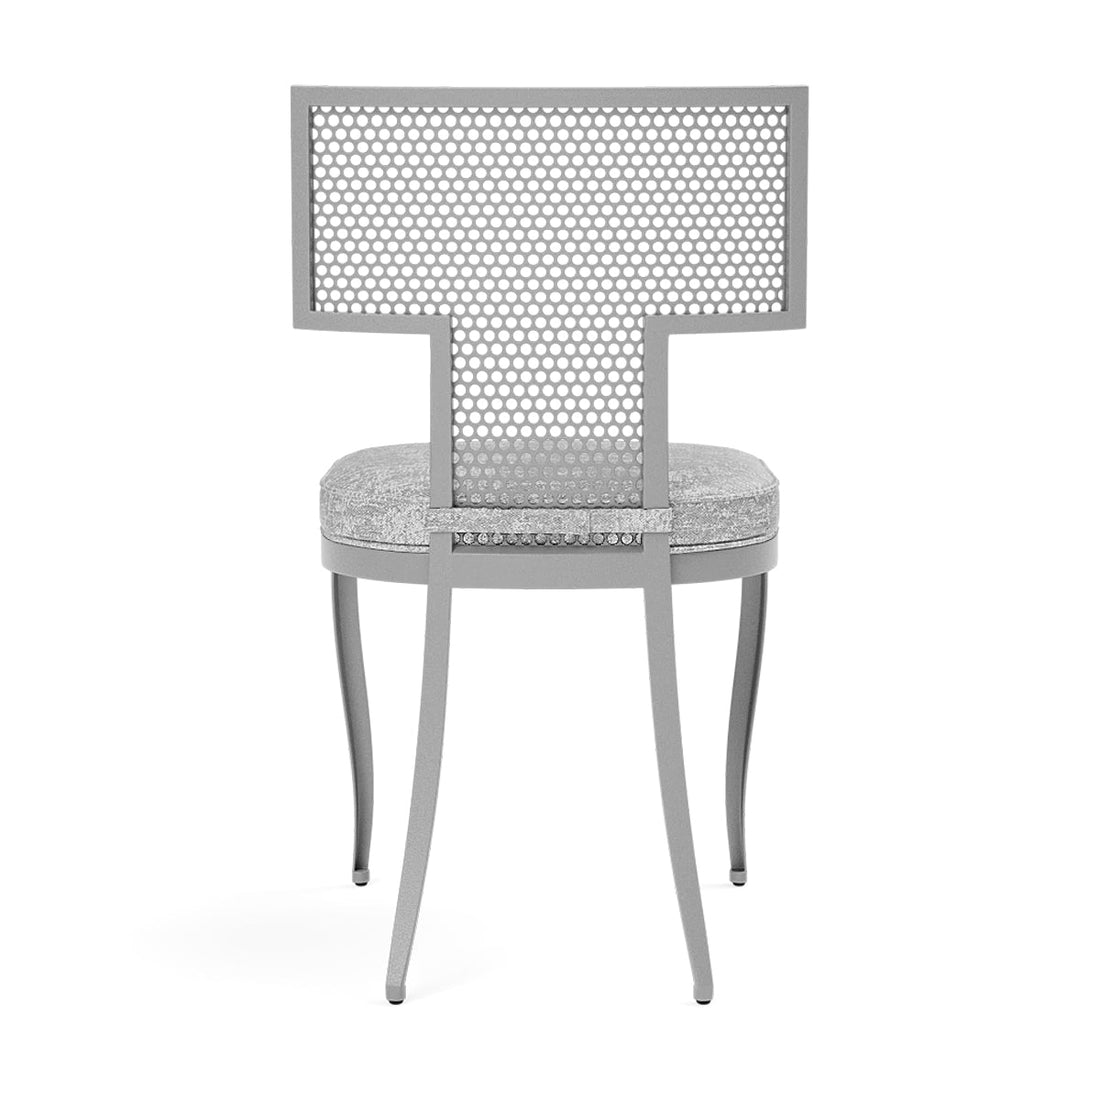 Made Goods Hadley Metal Outdoor Dining Chair in Volta High-Performance Fabric